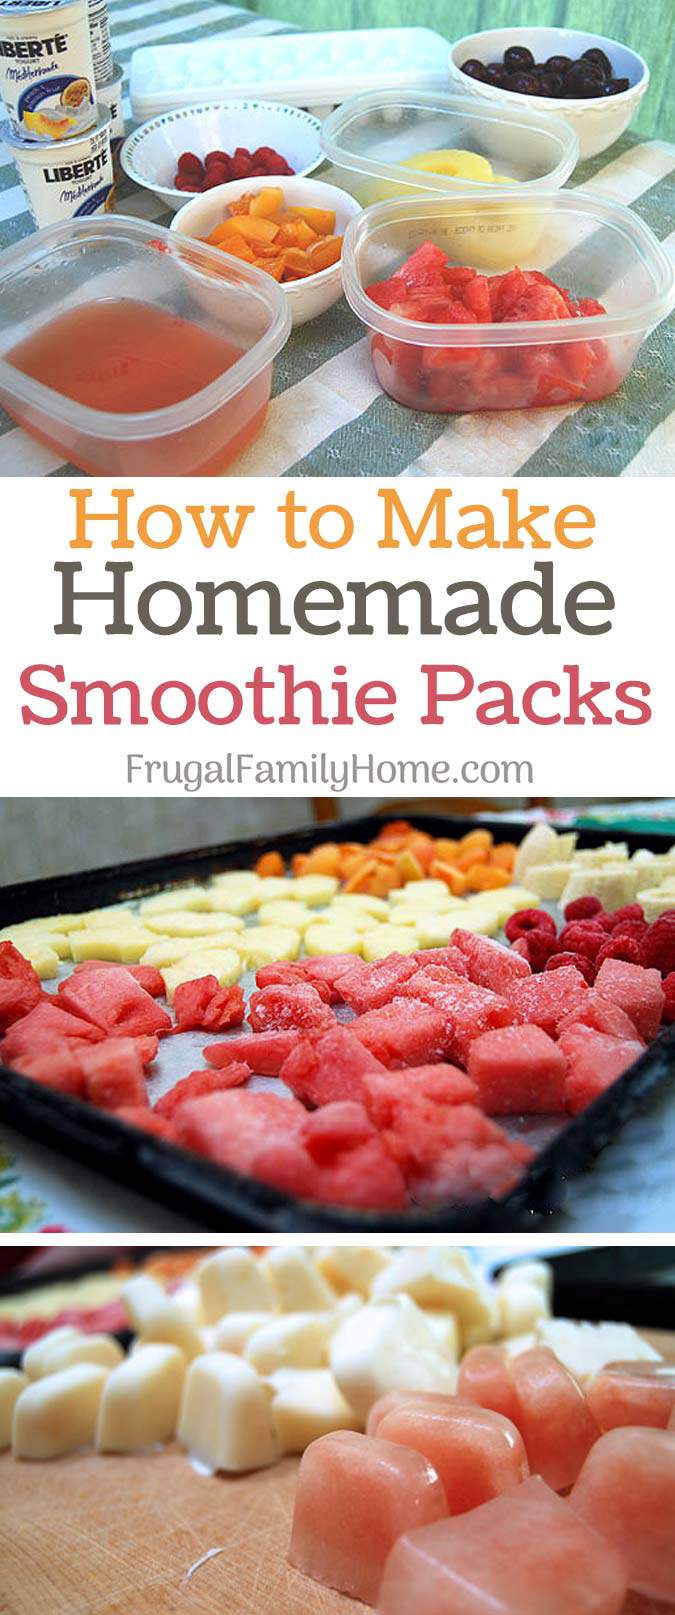 Make it from Scratch…Freezer Smoothie Packages